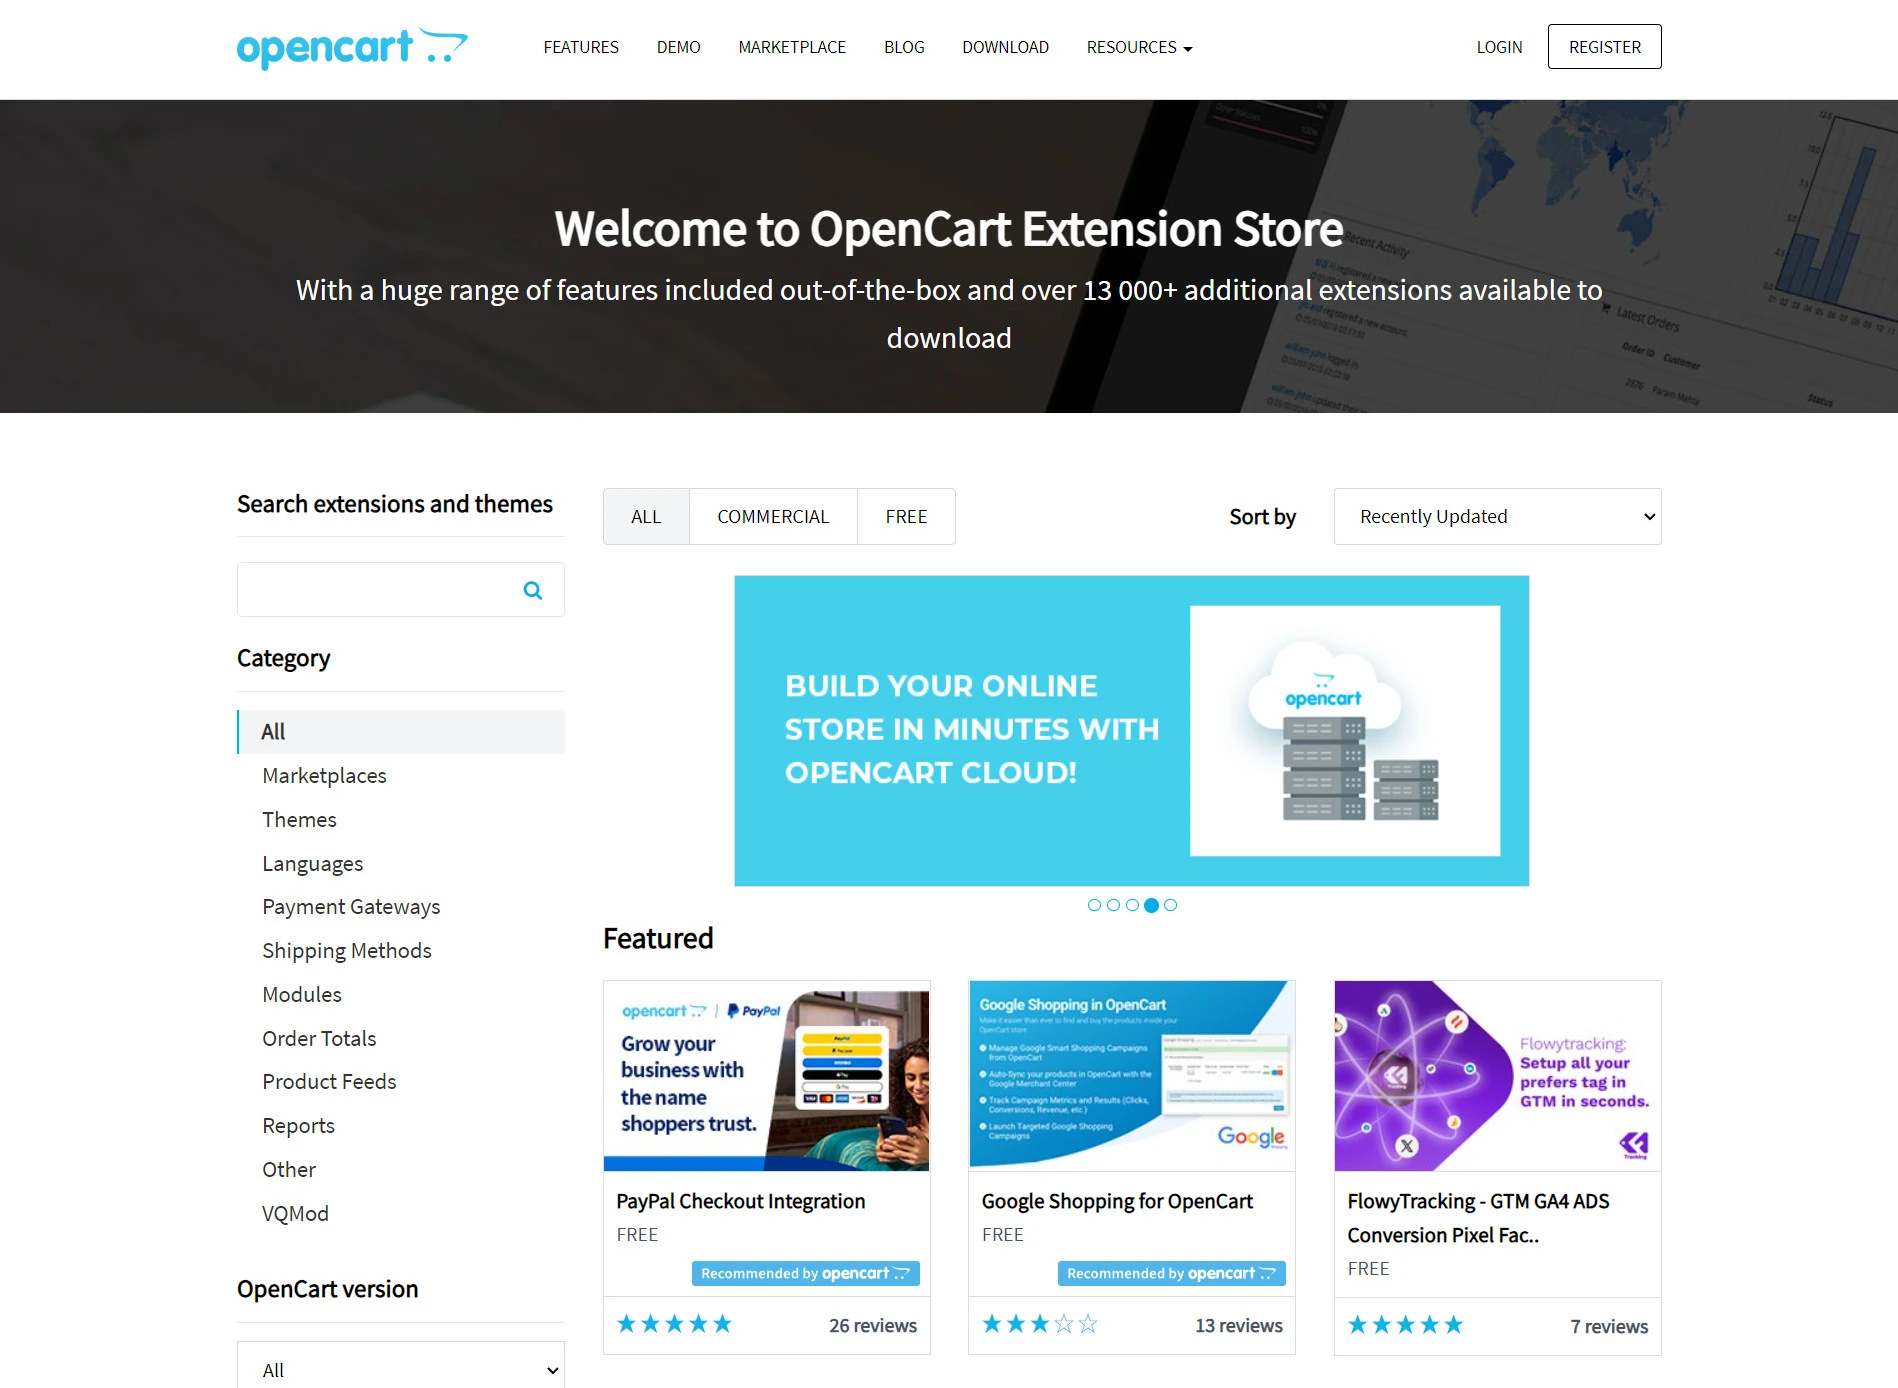 opencart extension store homepage